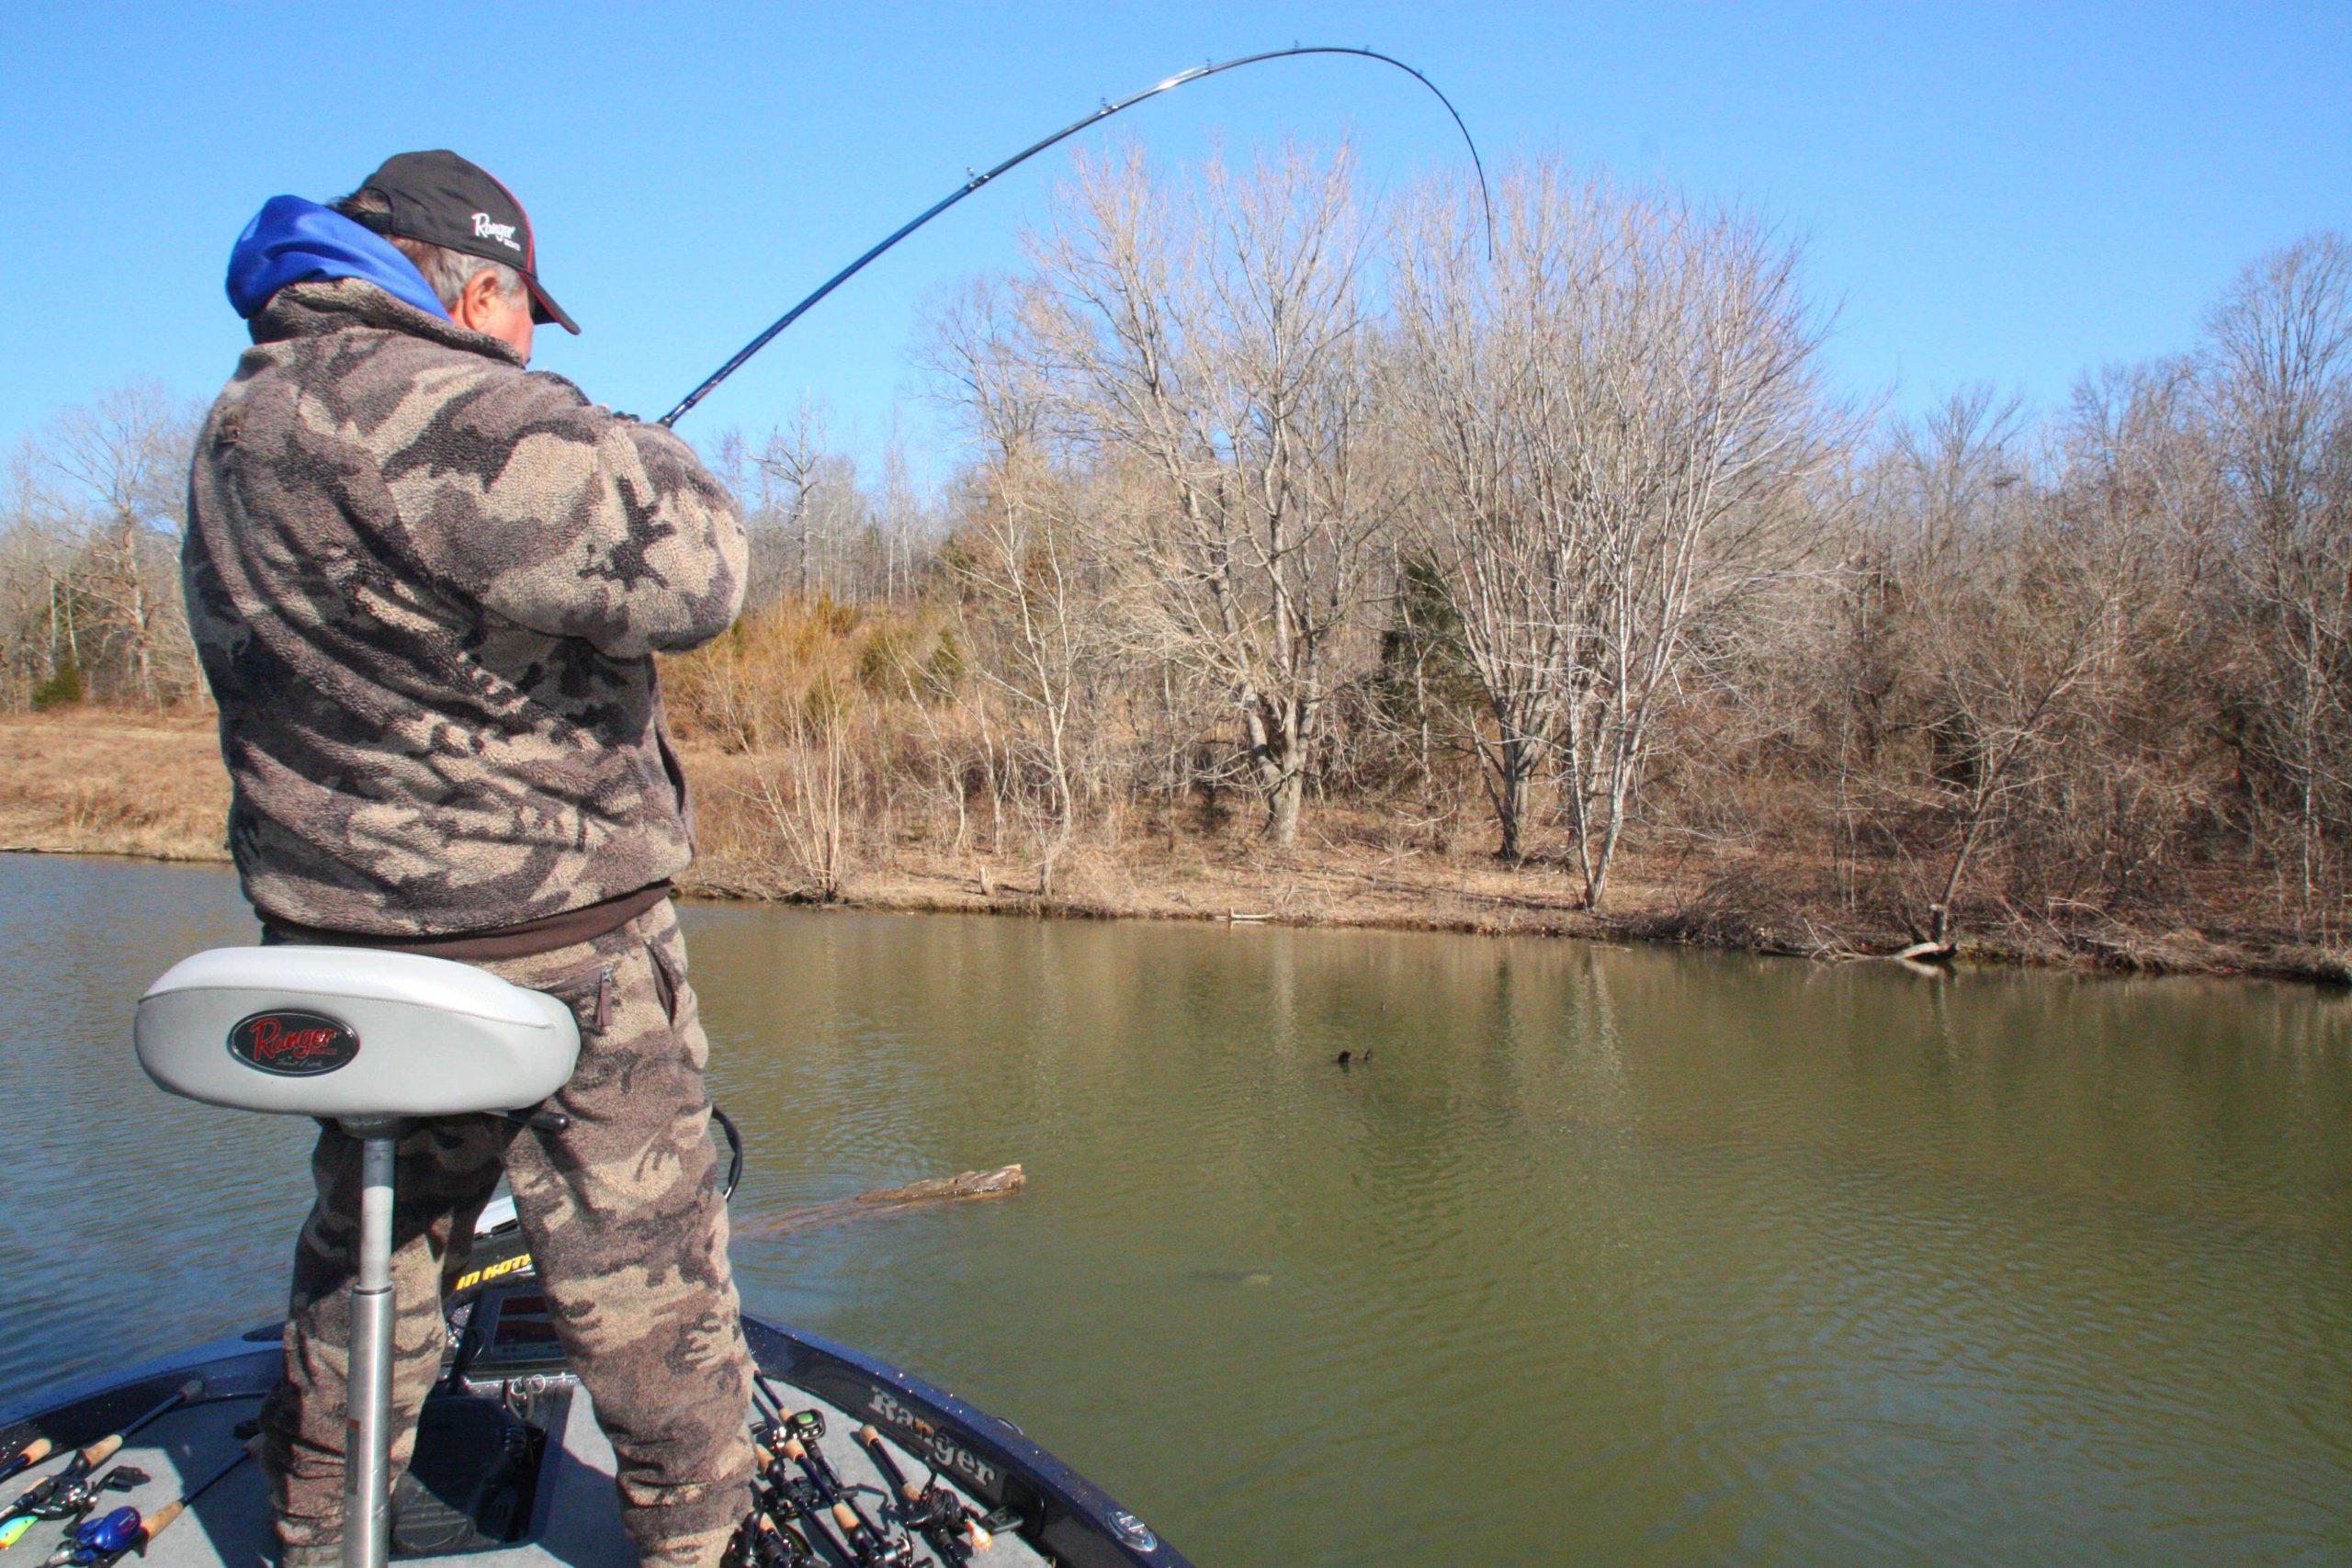 9:46 a.m. Brauer hooks a good fish on a submerged log with a jig.